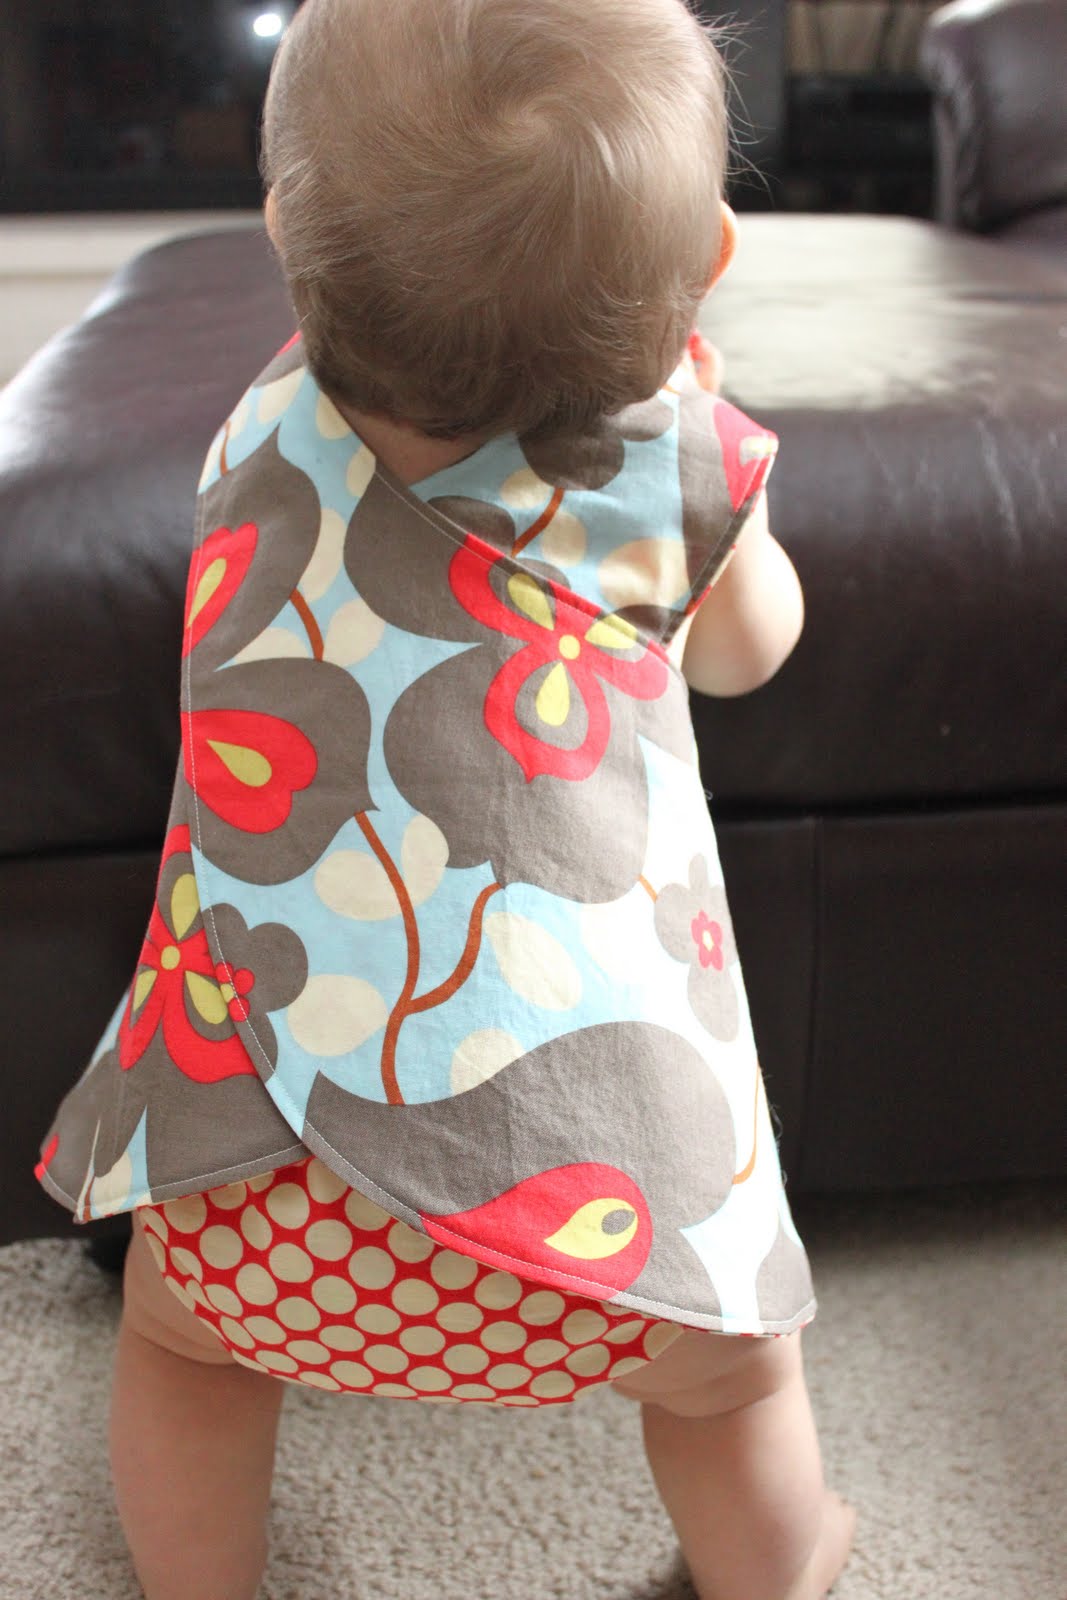 Little Girl’s Crossover Pinafore Pattern + Tutorial